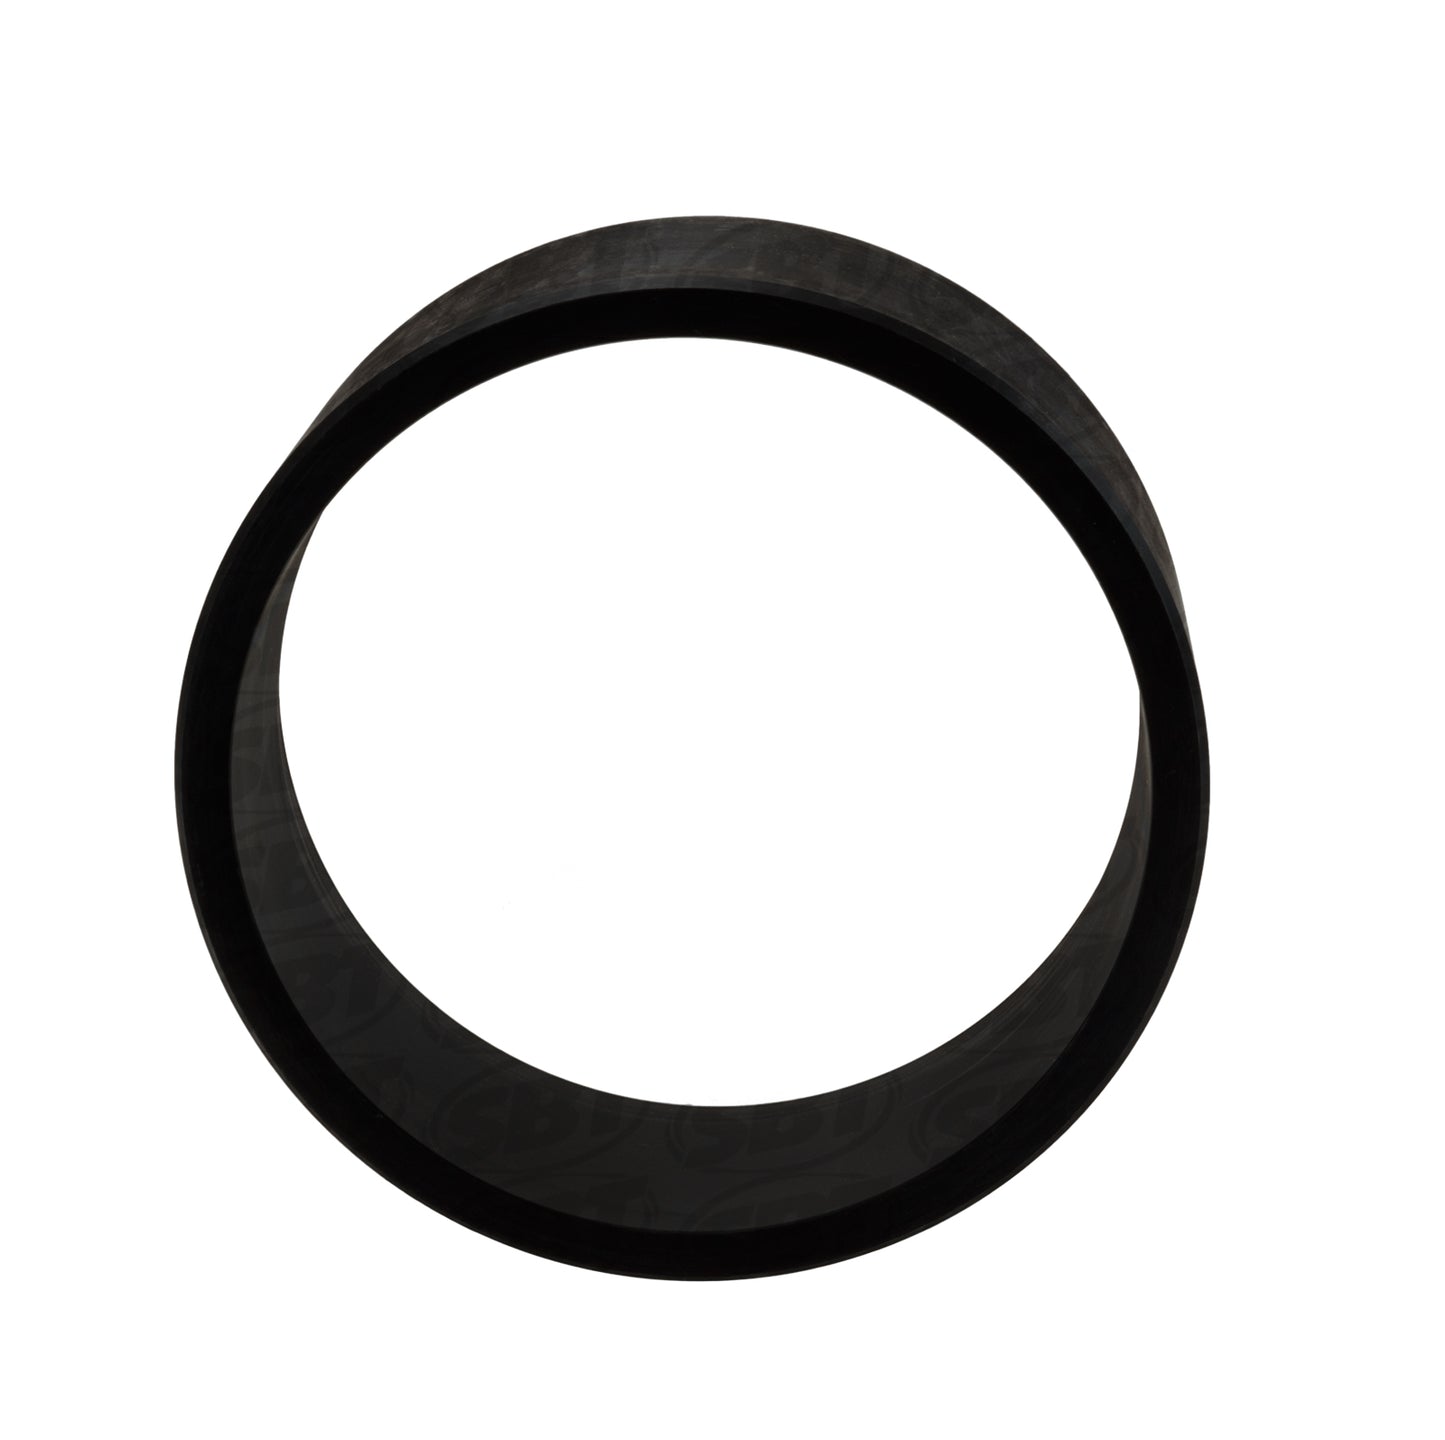 SBT Sea-Doo 90HO Replacement Wear Ring 267000897